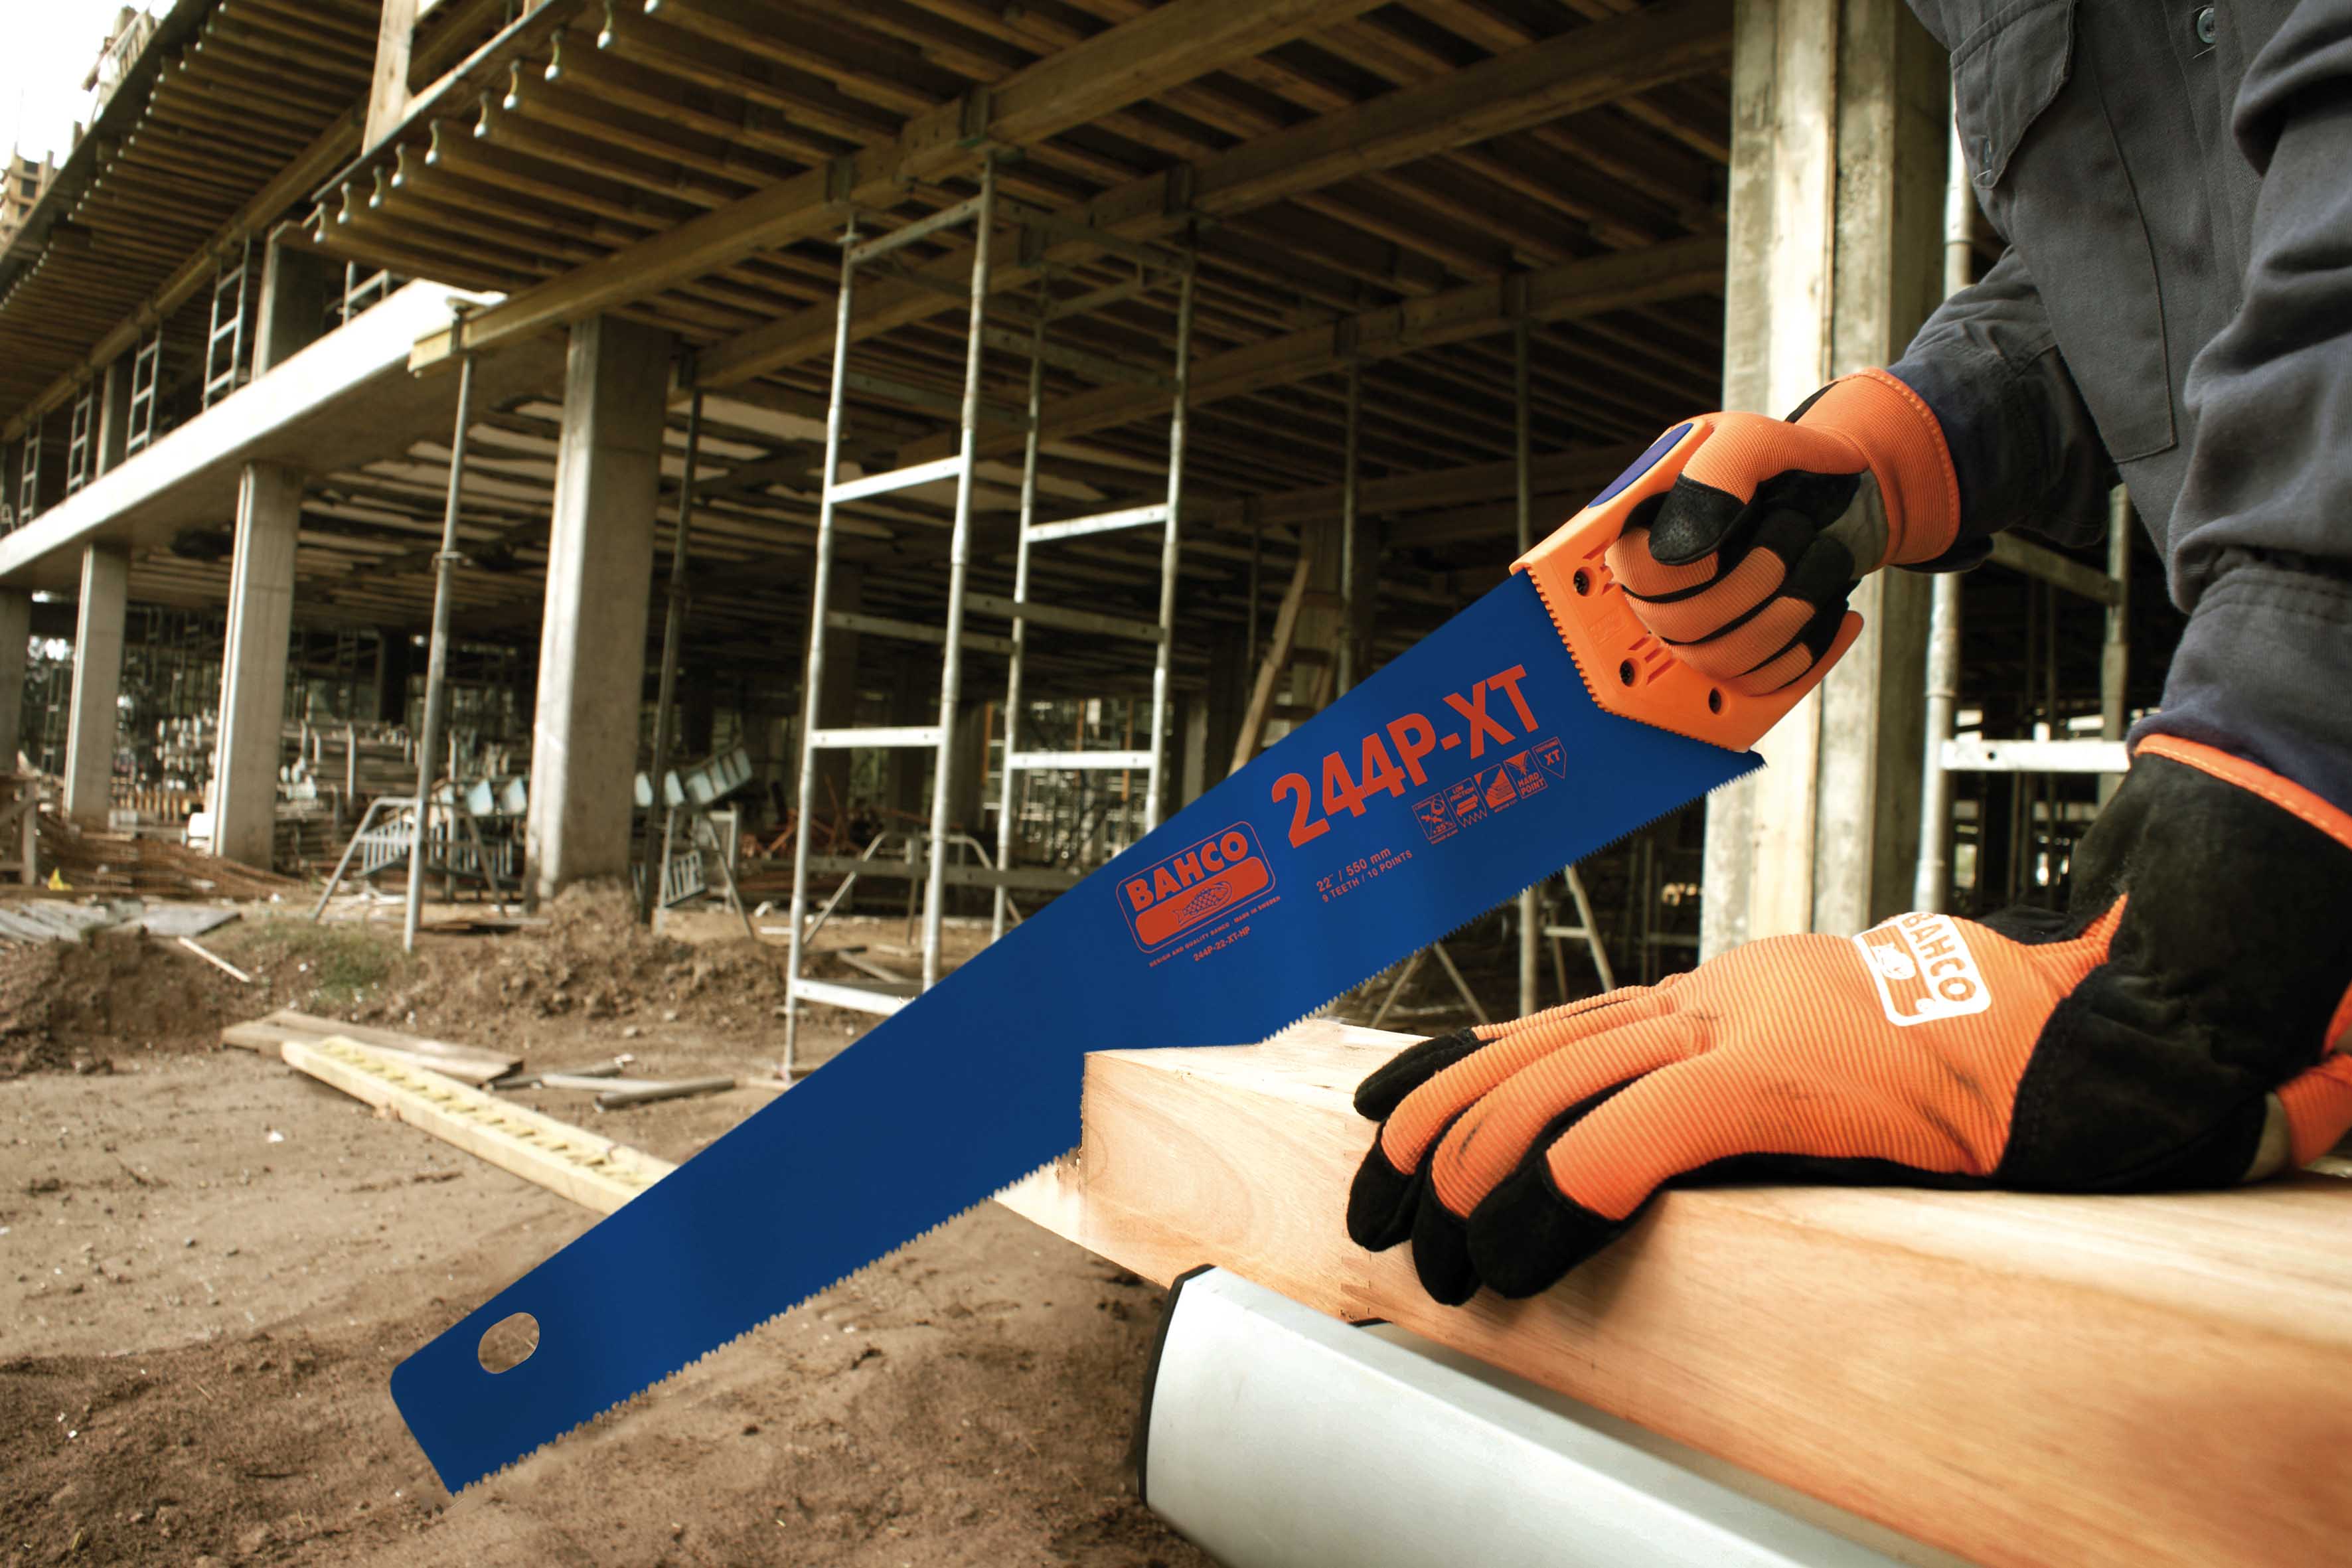 Bahcos-new-244P-XT-hand-saw-with-blue-low-friction-coated-blade.jpg